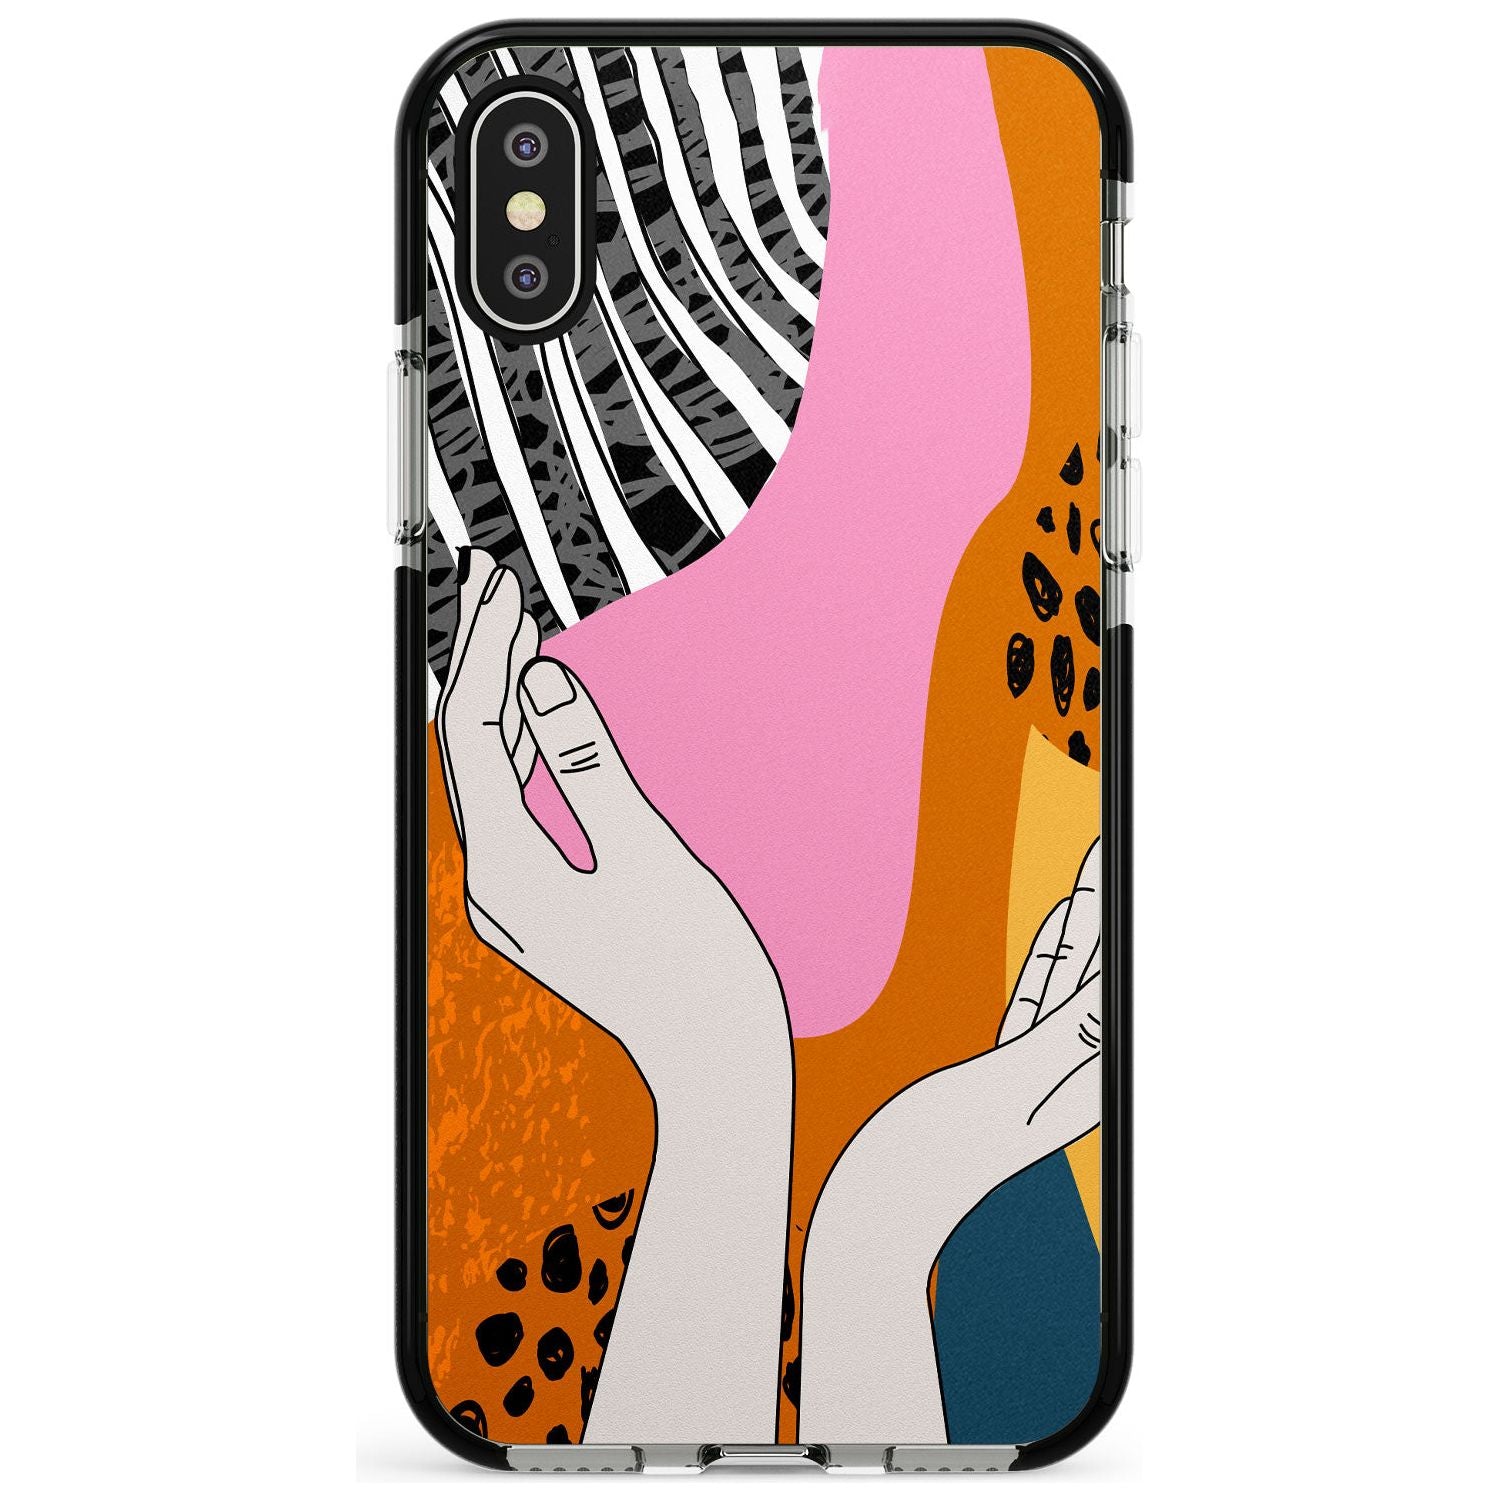 Catching Feels Pink Fade Impact Phone Case for iPhone X XS Max XR